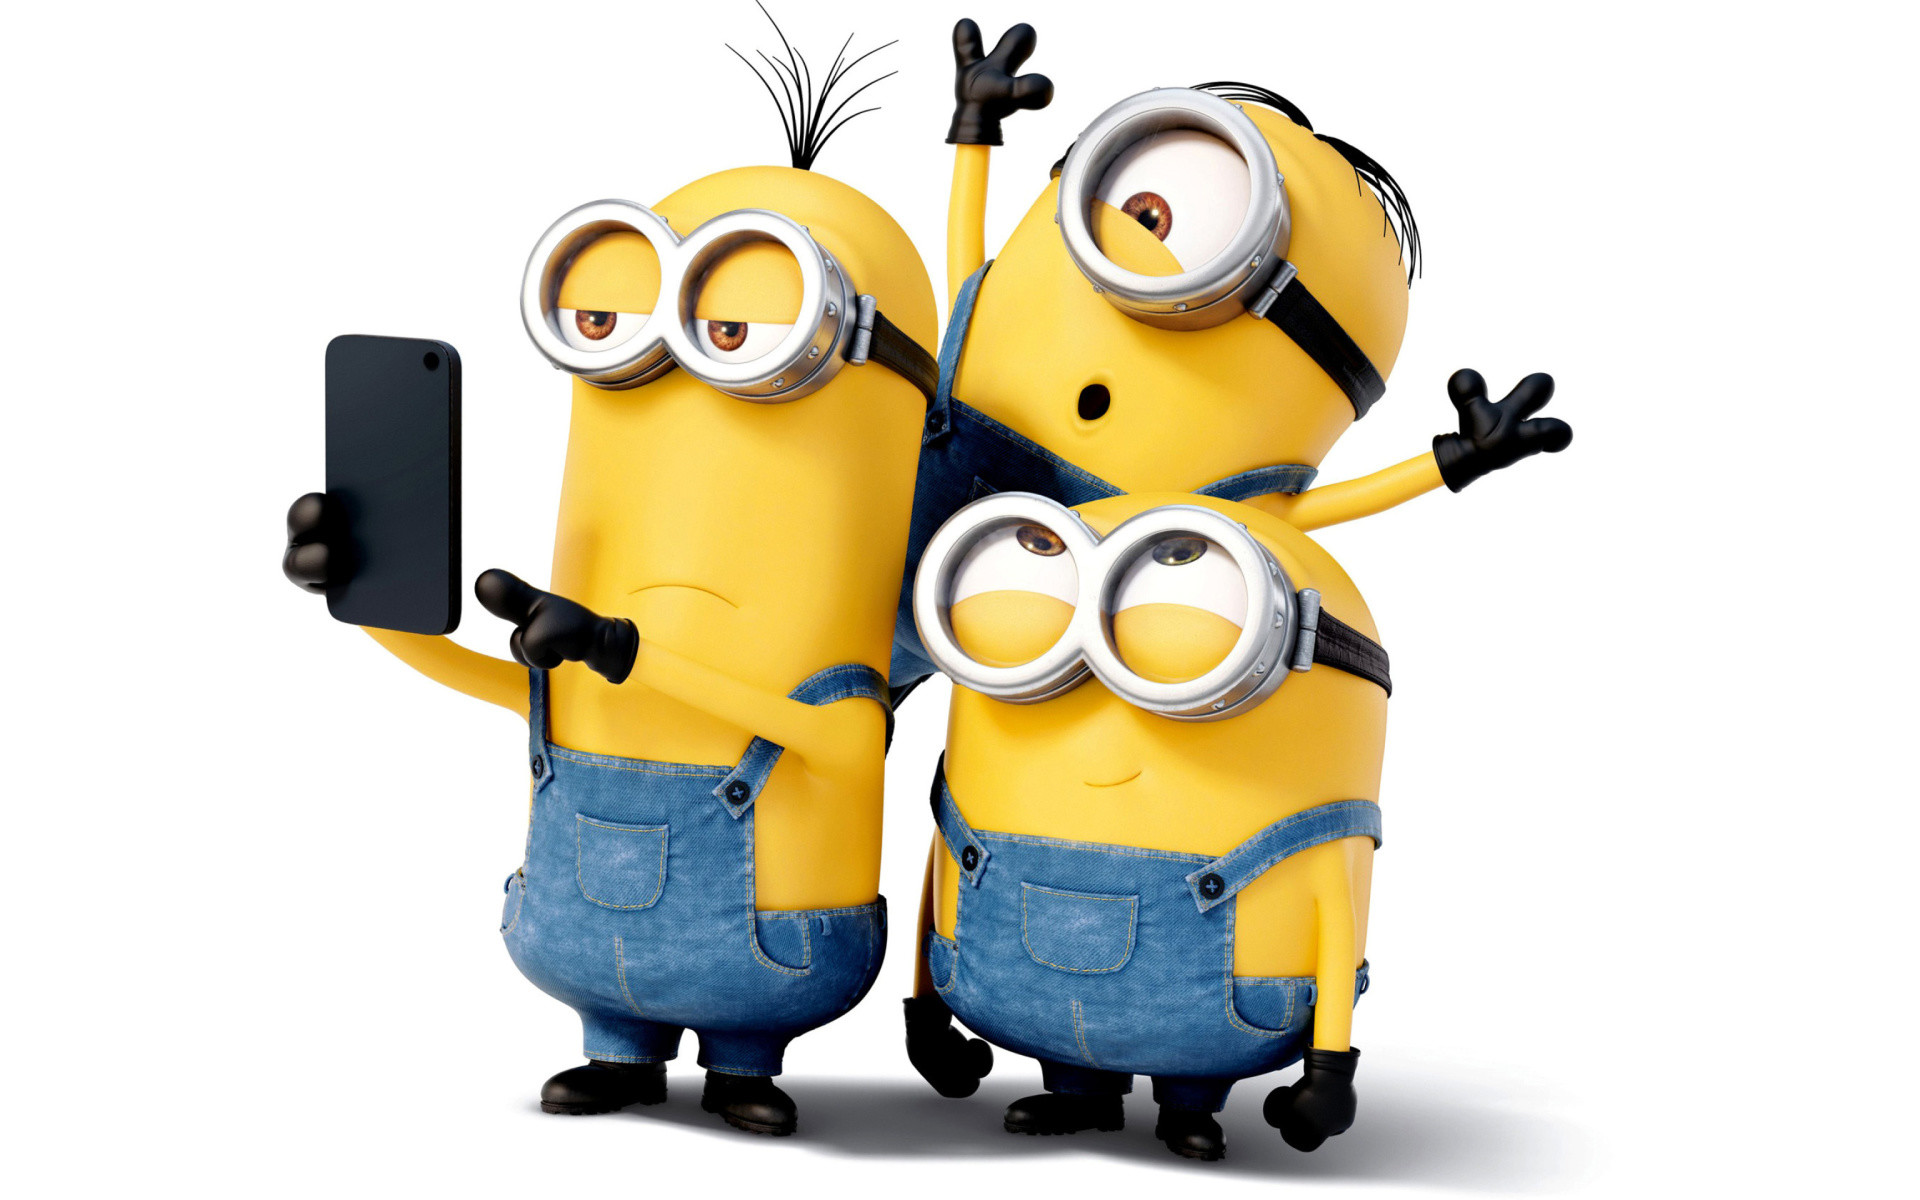 Minion Wallpaper Backgrounds (66+ images)